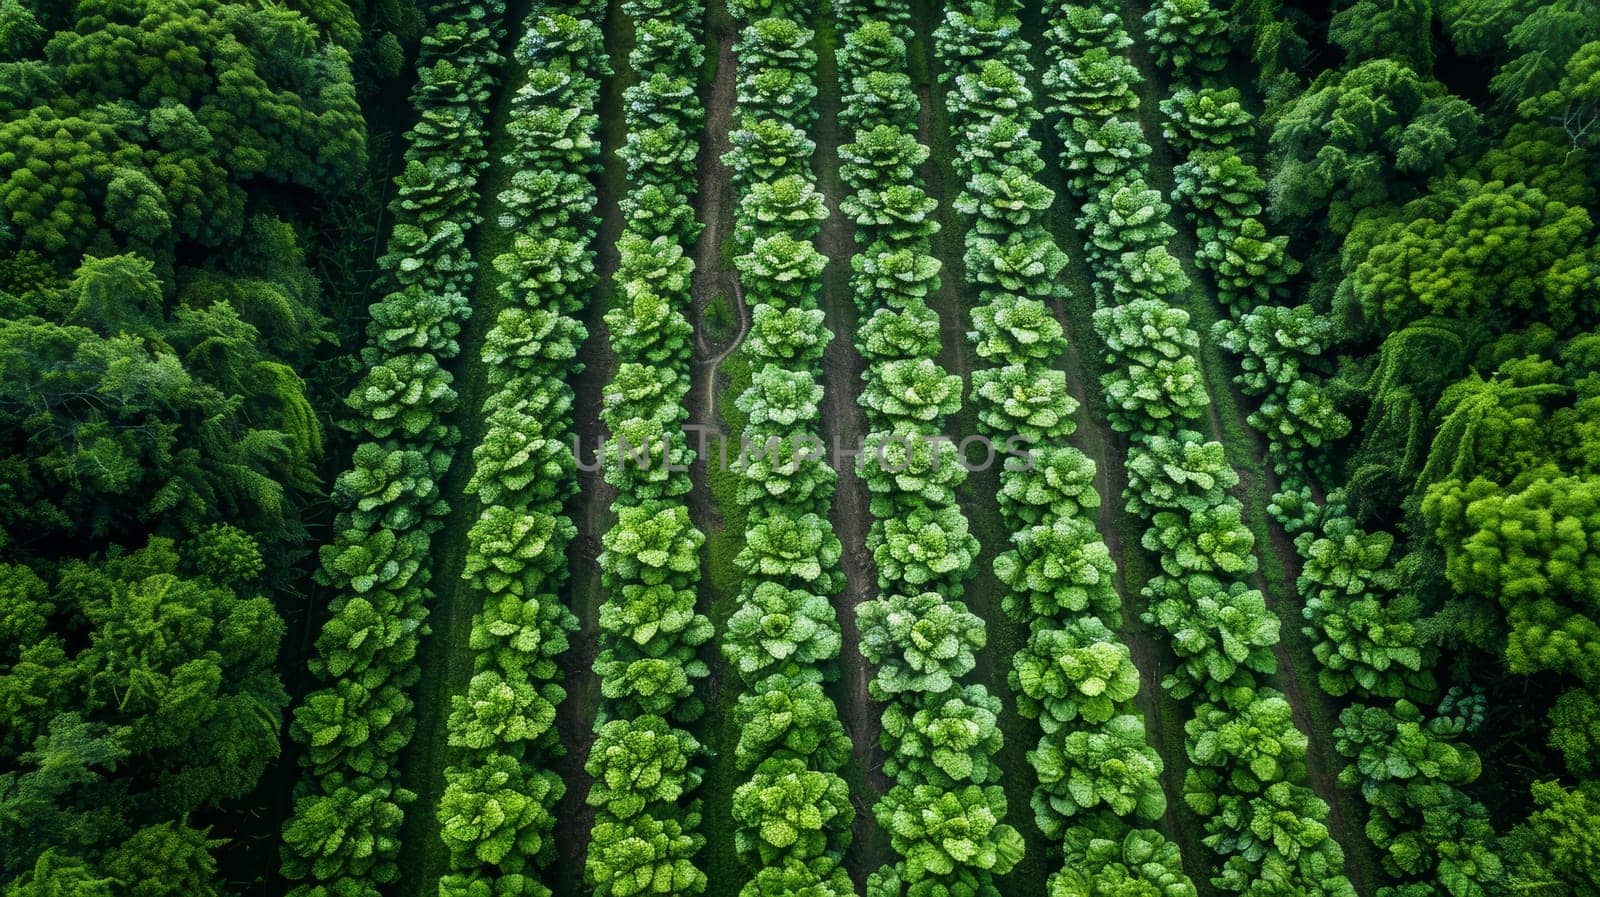 Aerial View of Lush Green Rows of Tobacco Plants in Farm Field Plantation